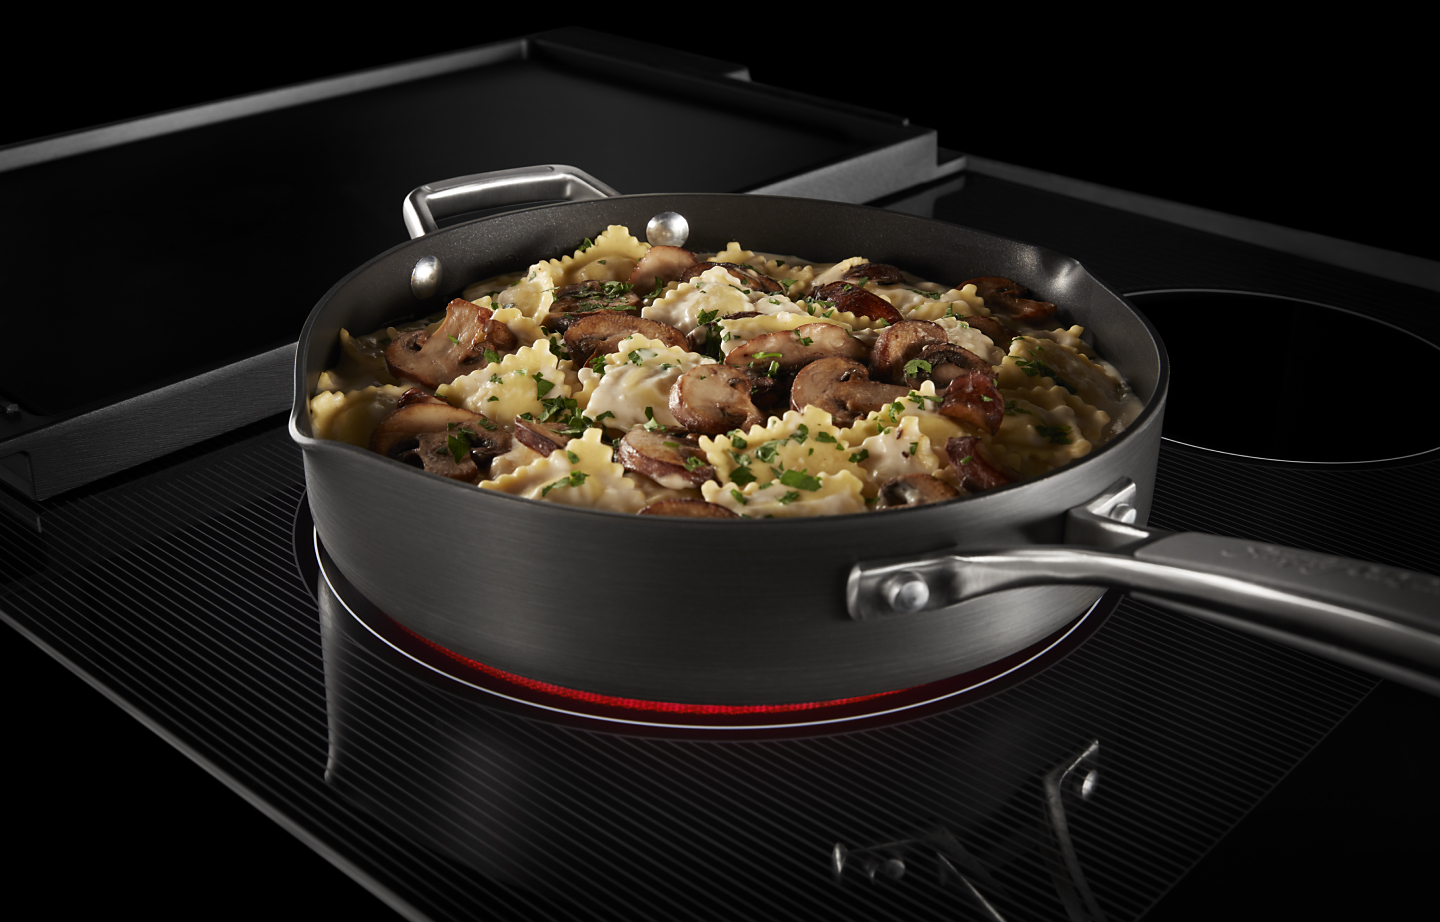 Dinner cooking on a KitchenAid®  induction cooktop.